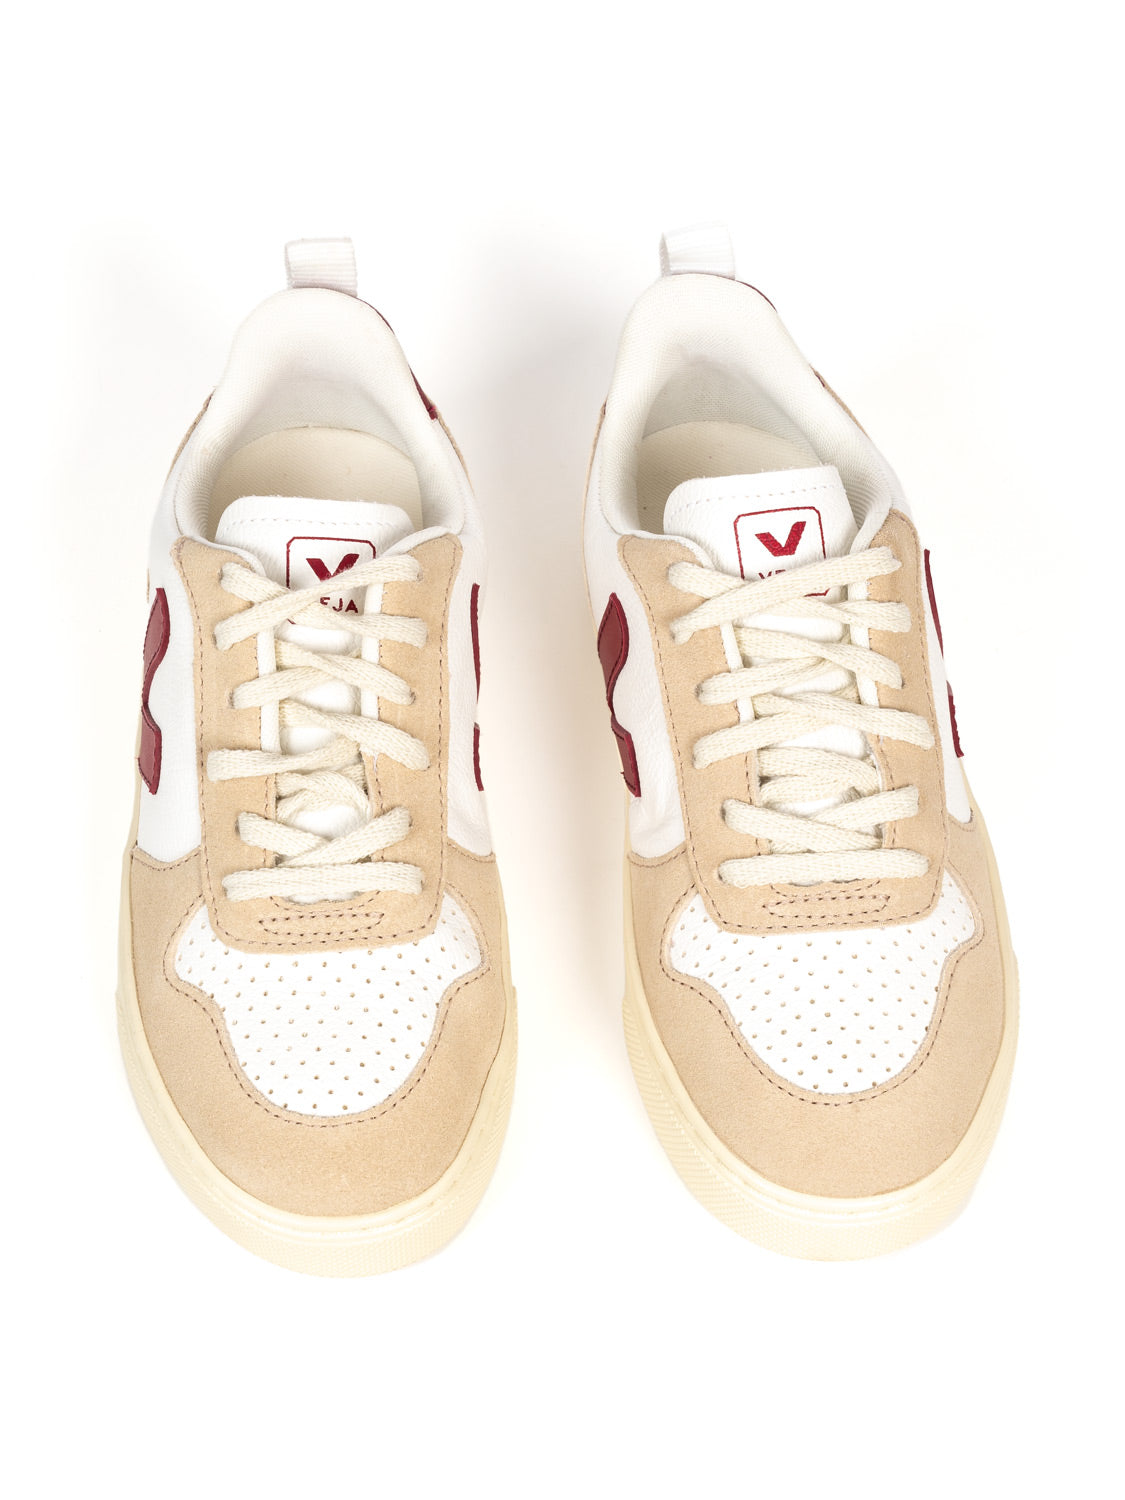 Small V-10 Laces Sneaker - Extra White/Red